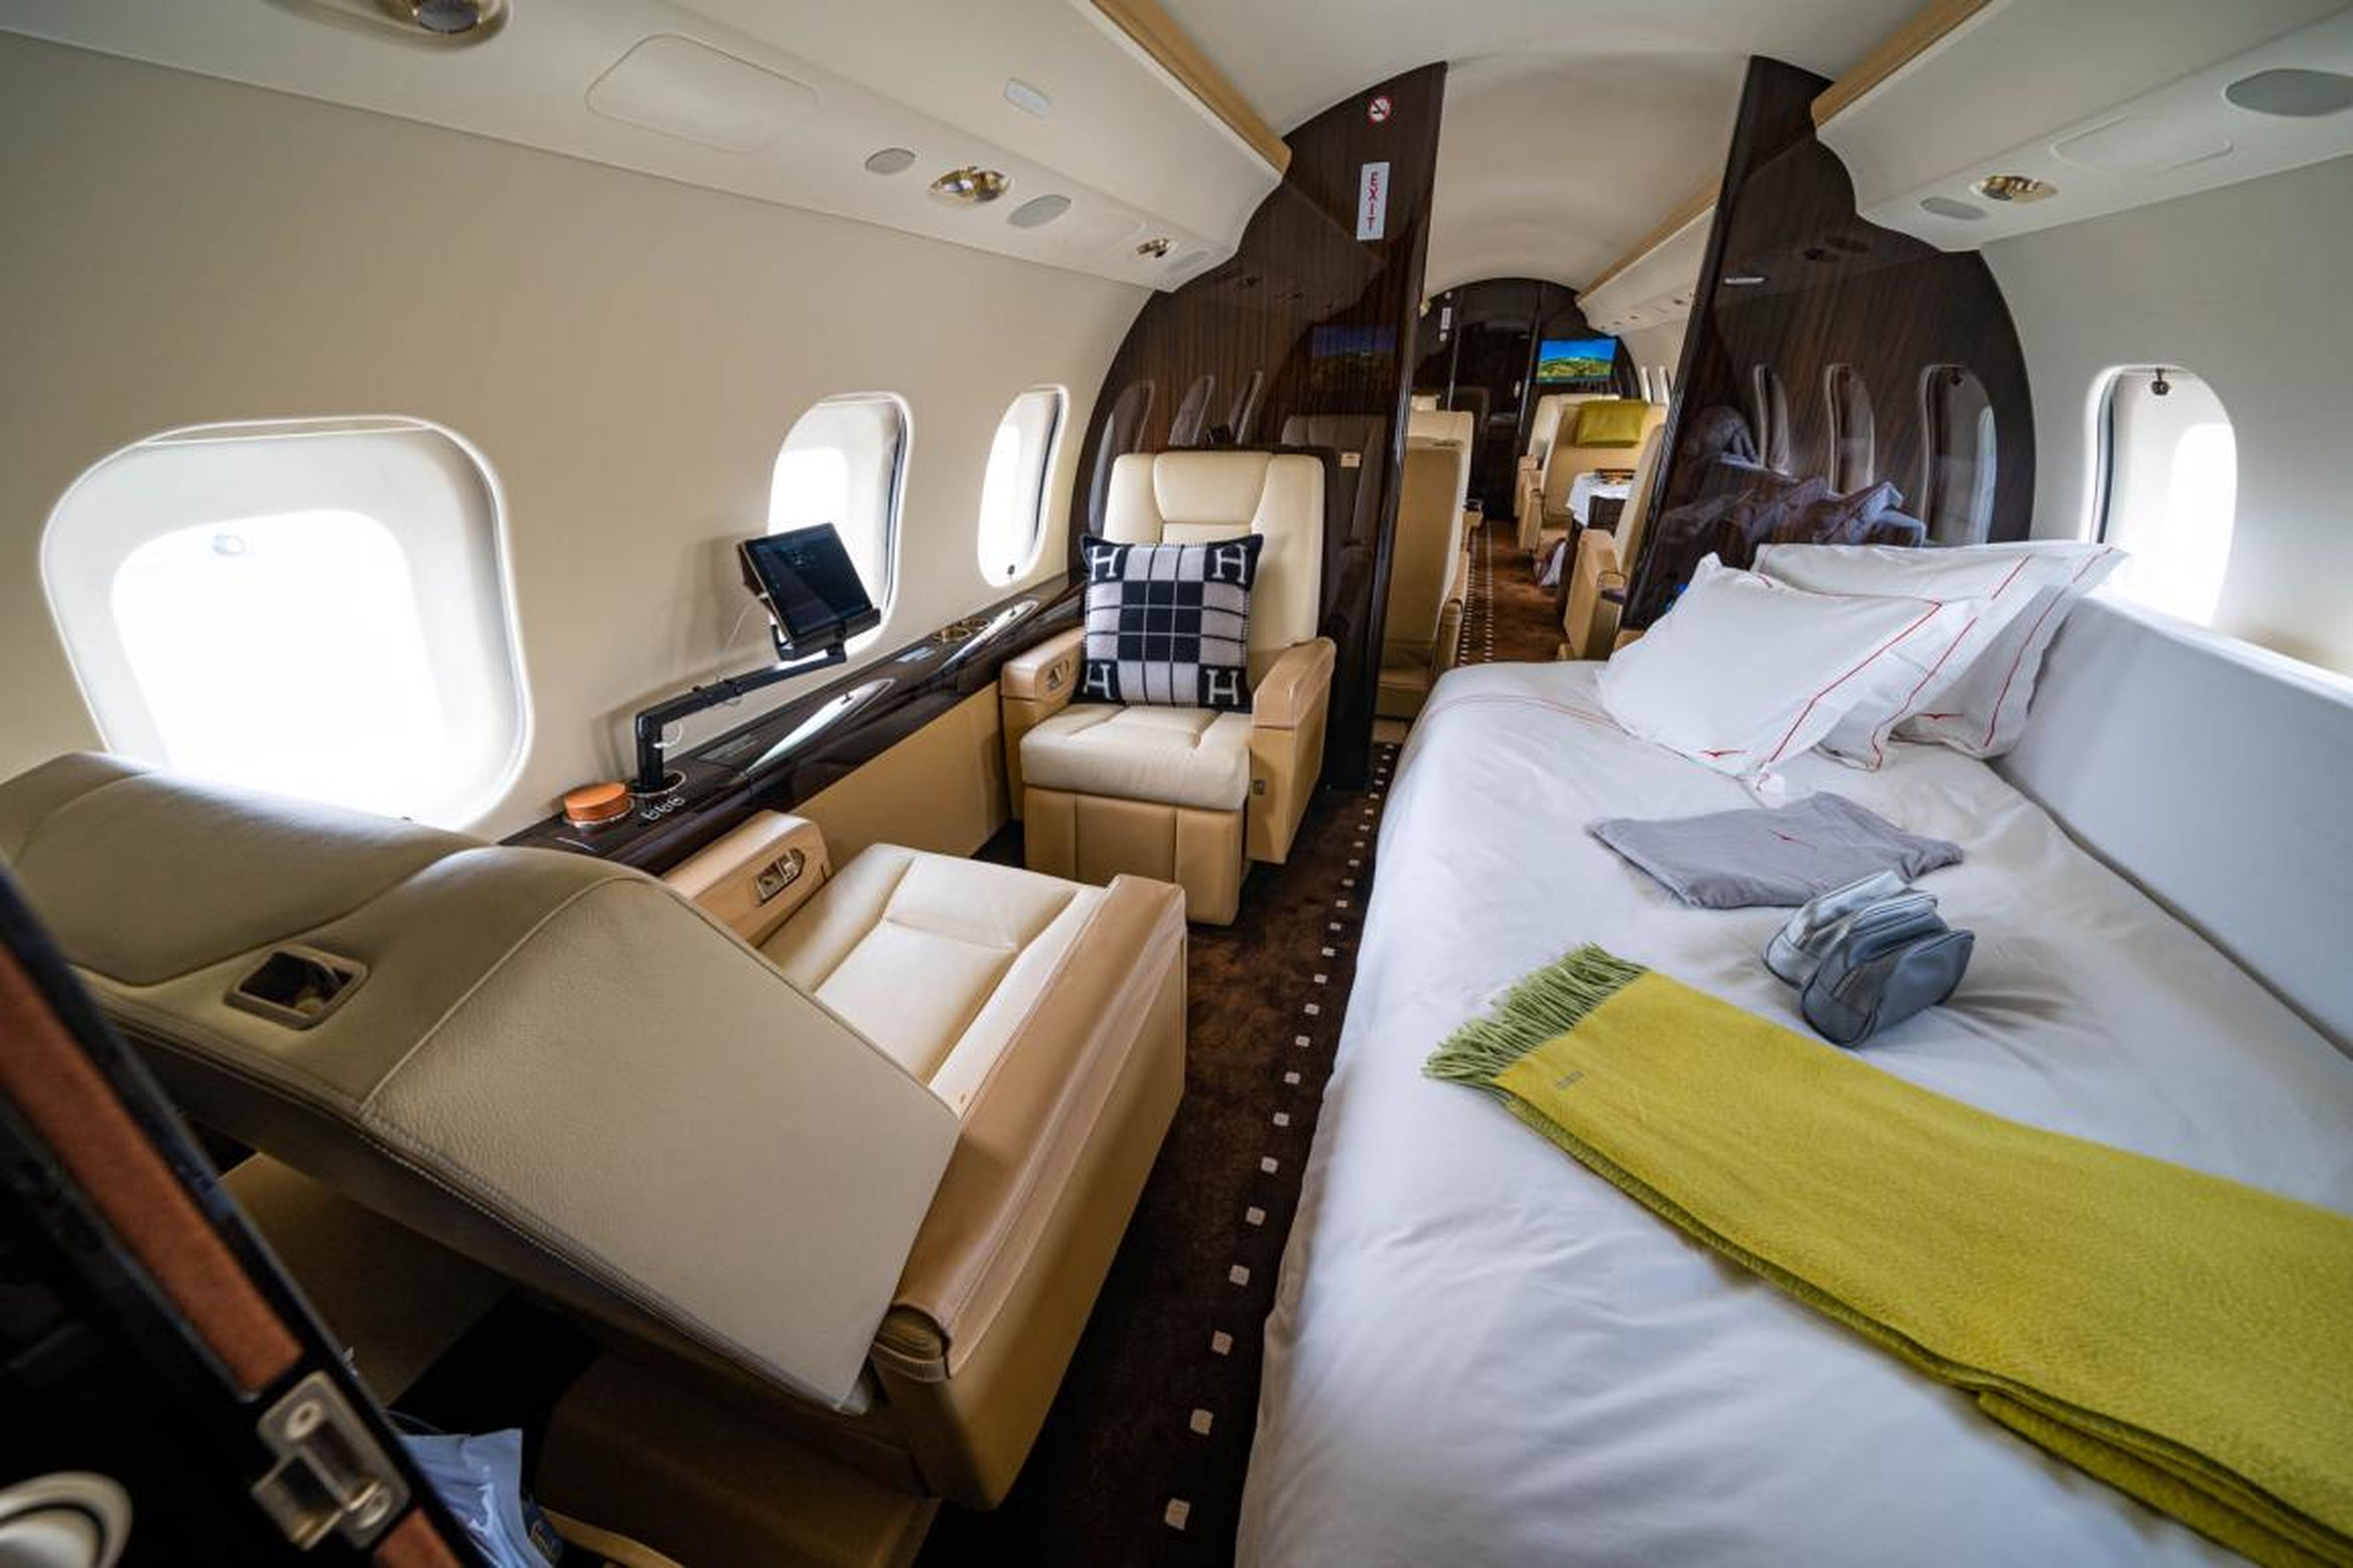 ... Or a bedroom. Flohr typically uses this configuration to be able to catch some sleep on overnight flights.